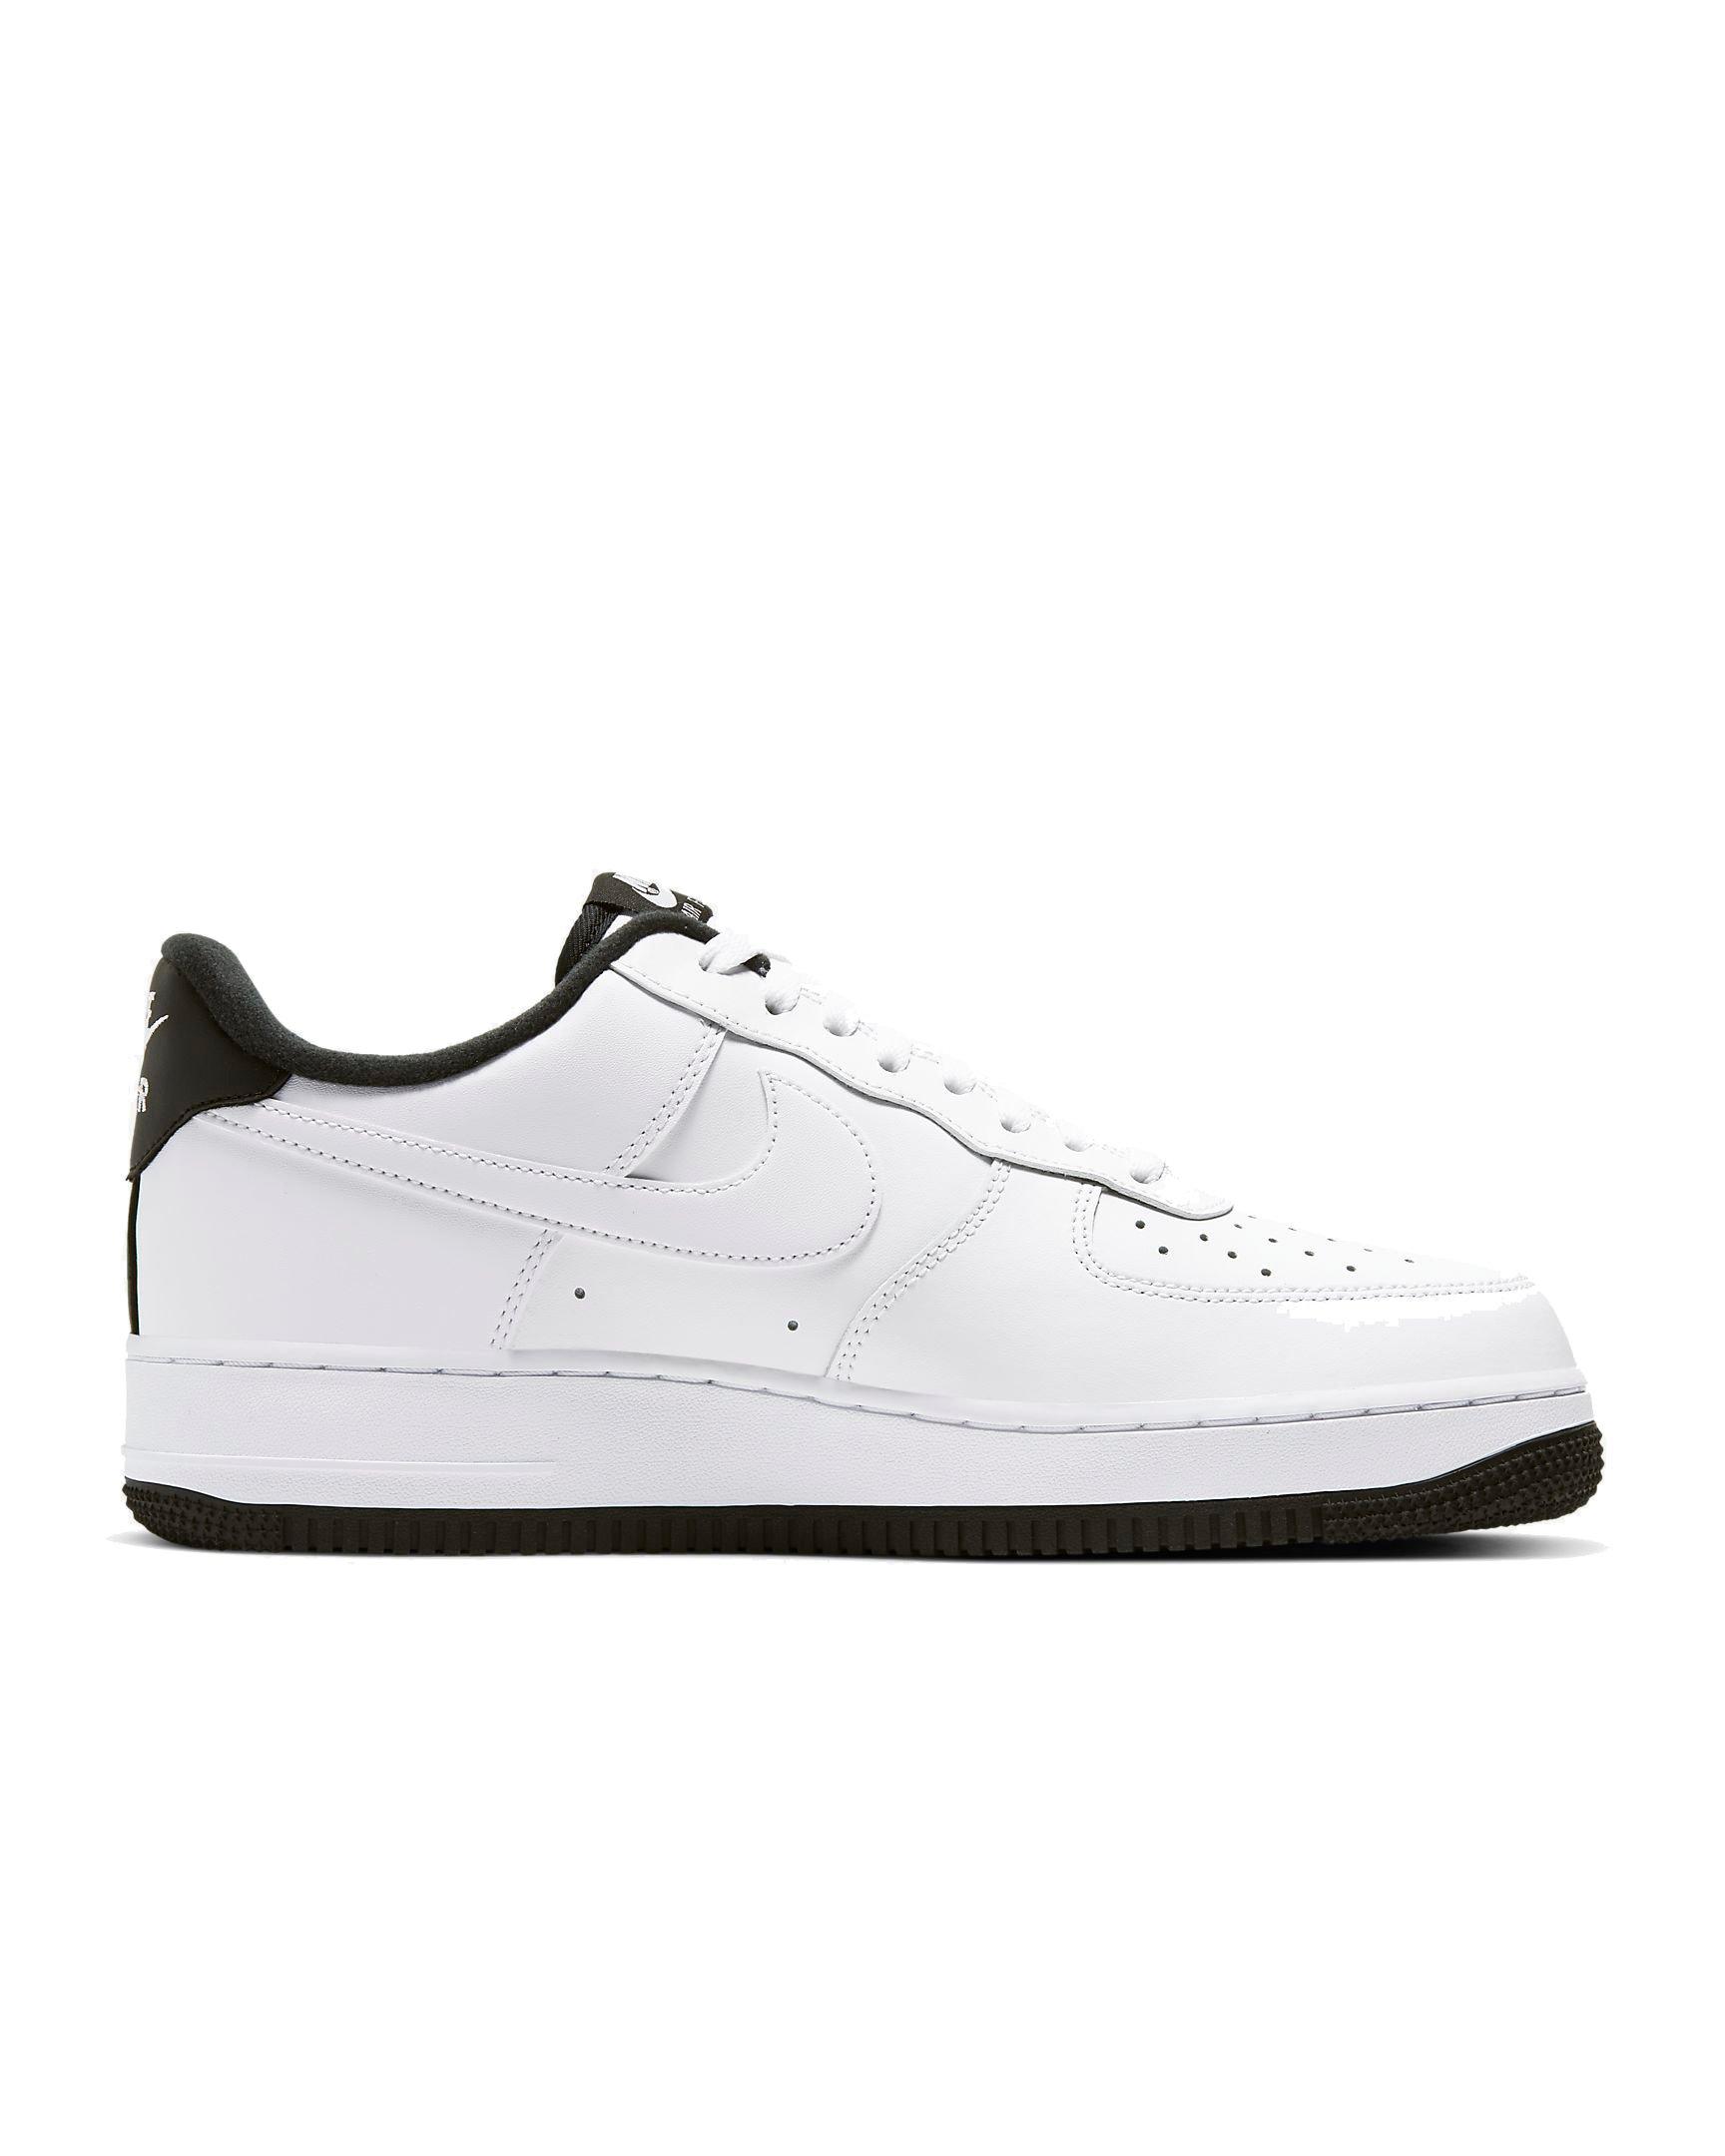 white air forces with black bottom